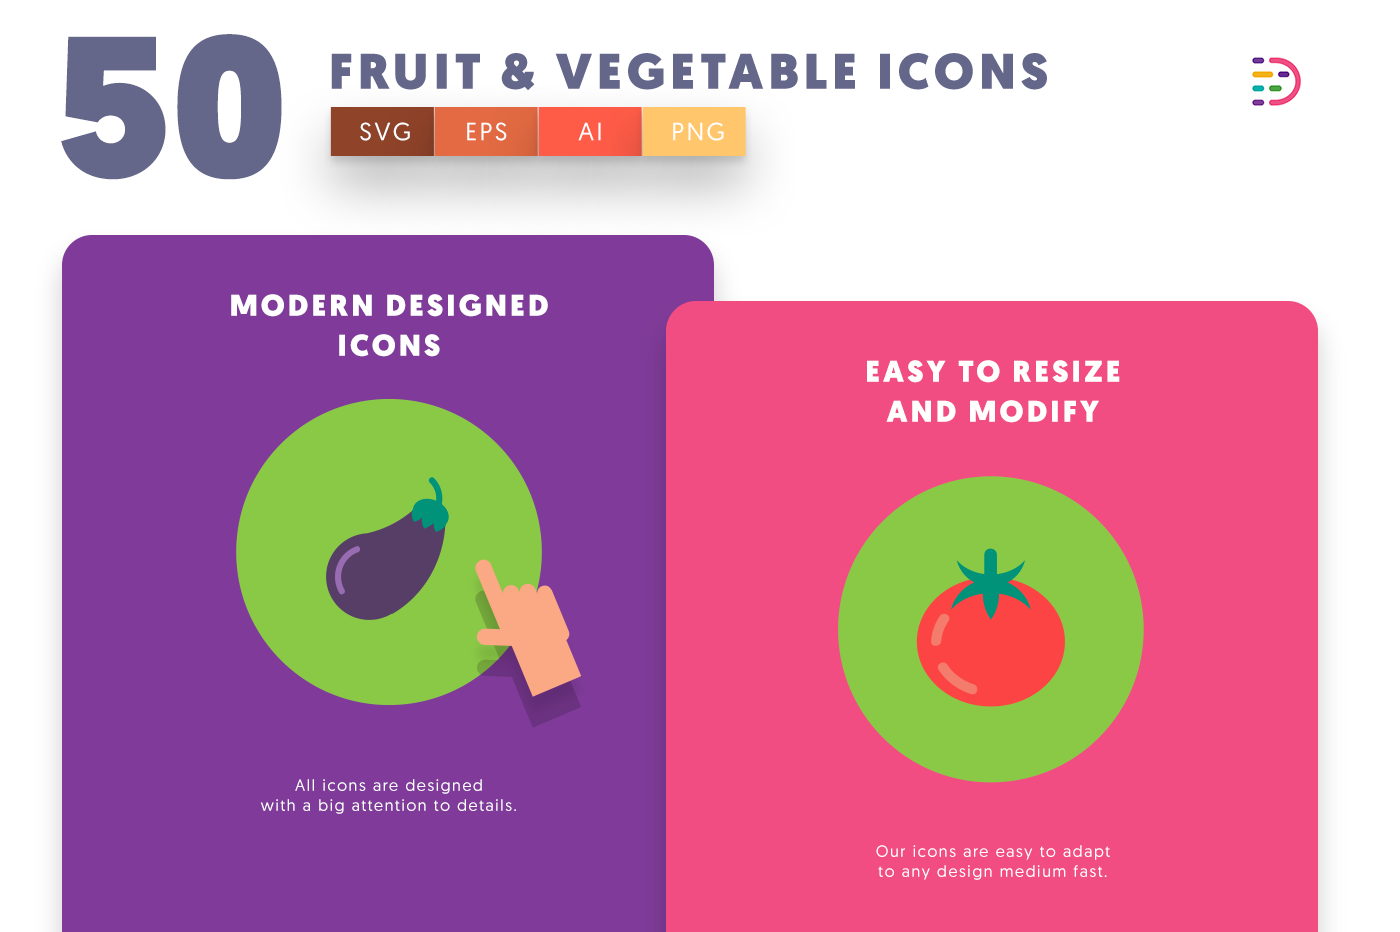 Customizable and vector Fruits and Vegetable Icons